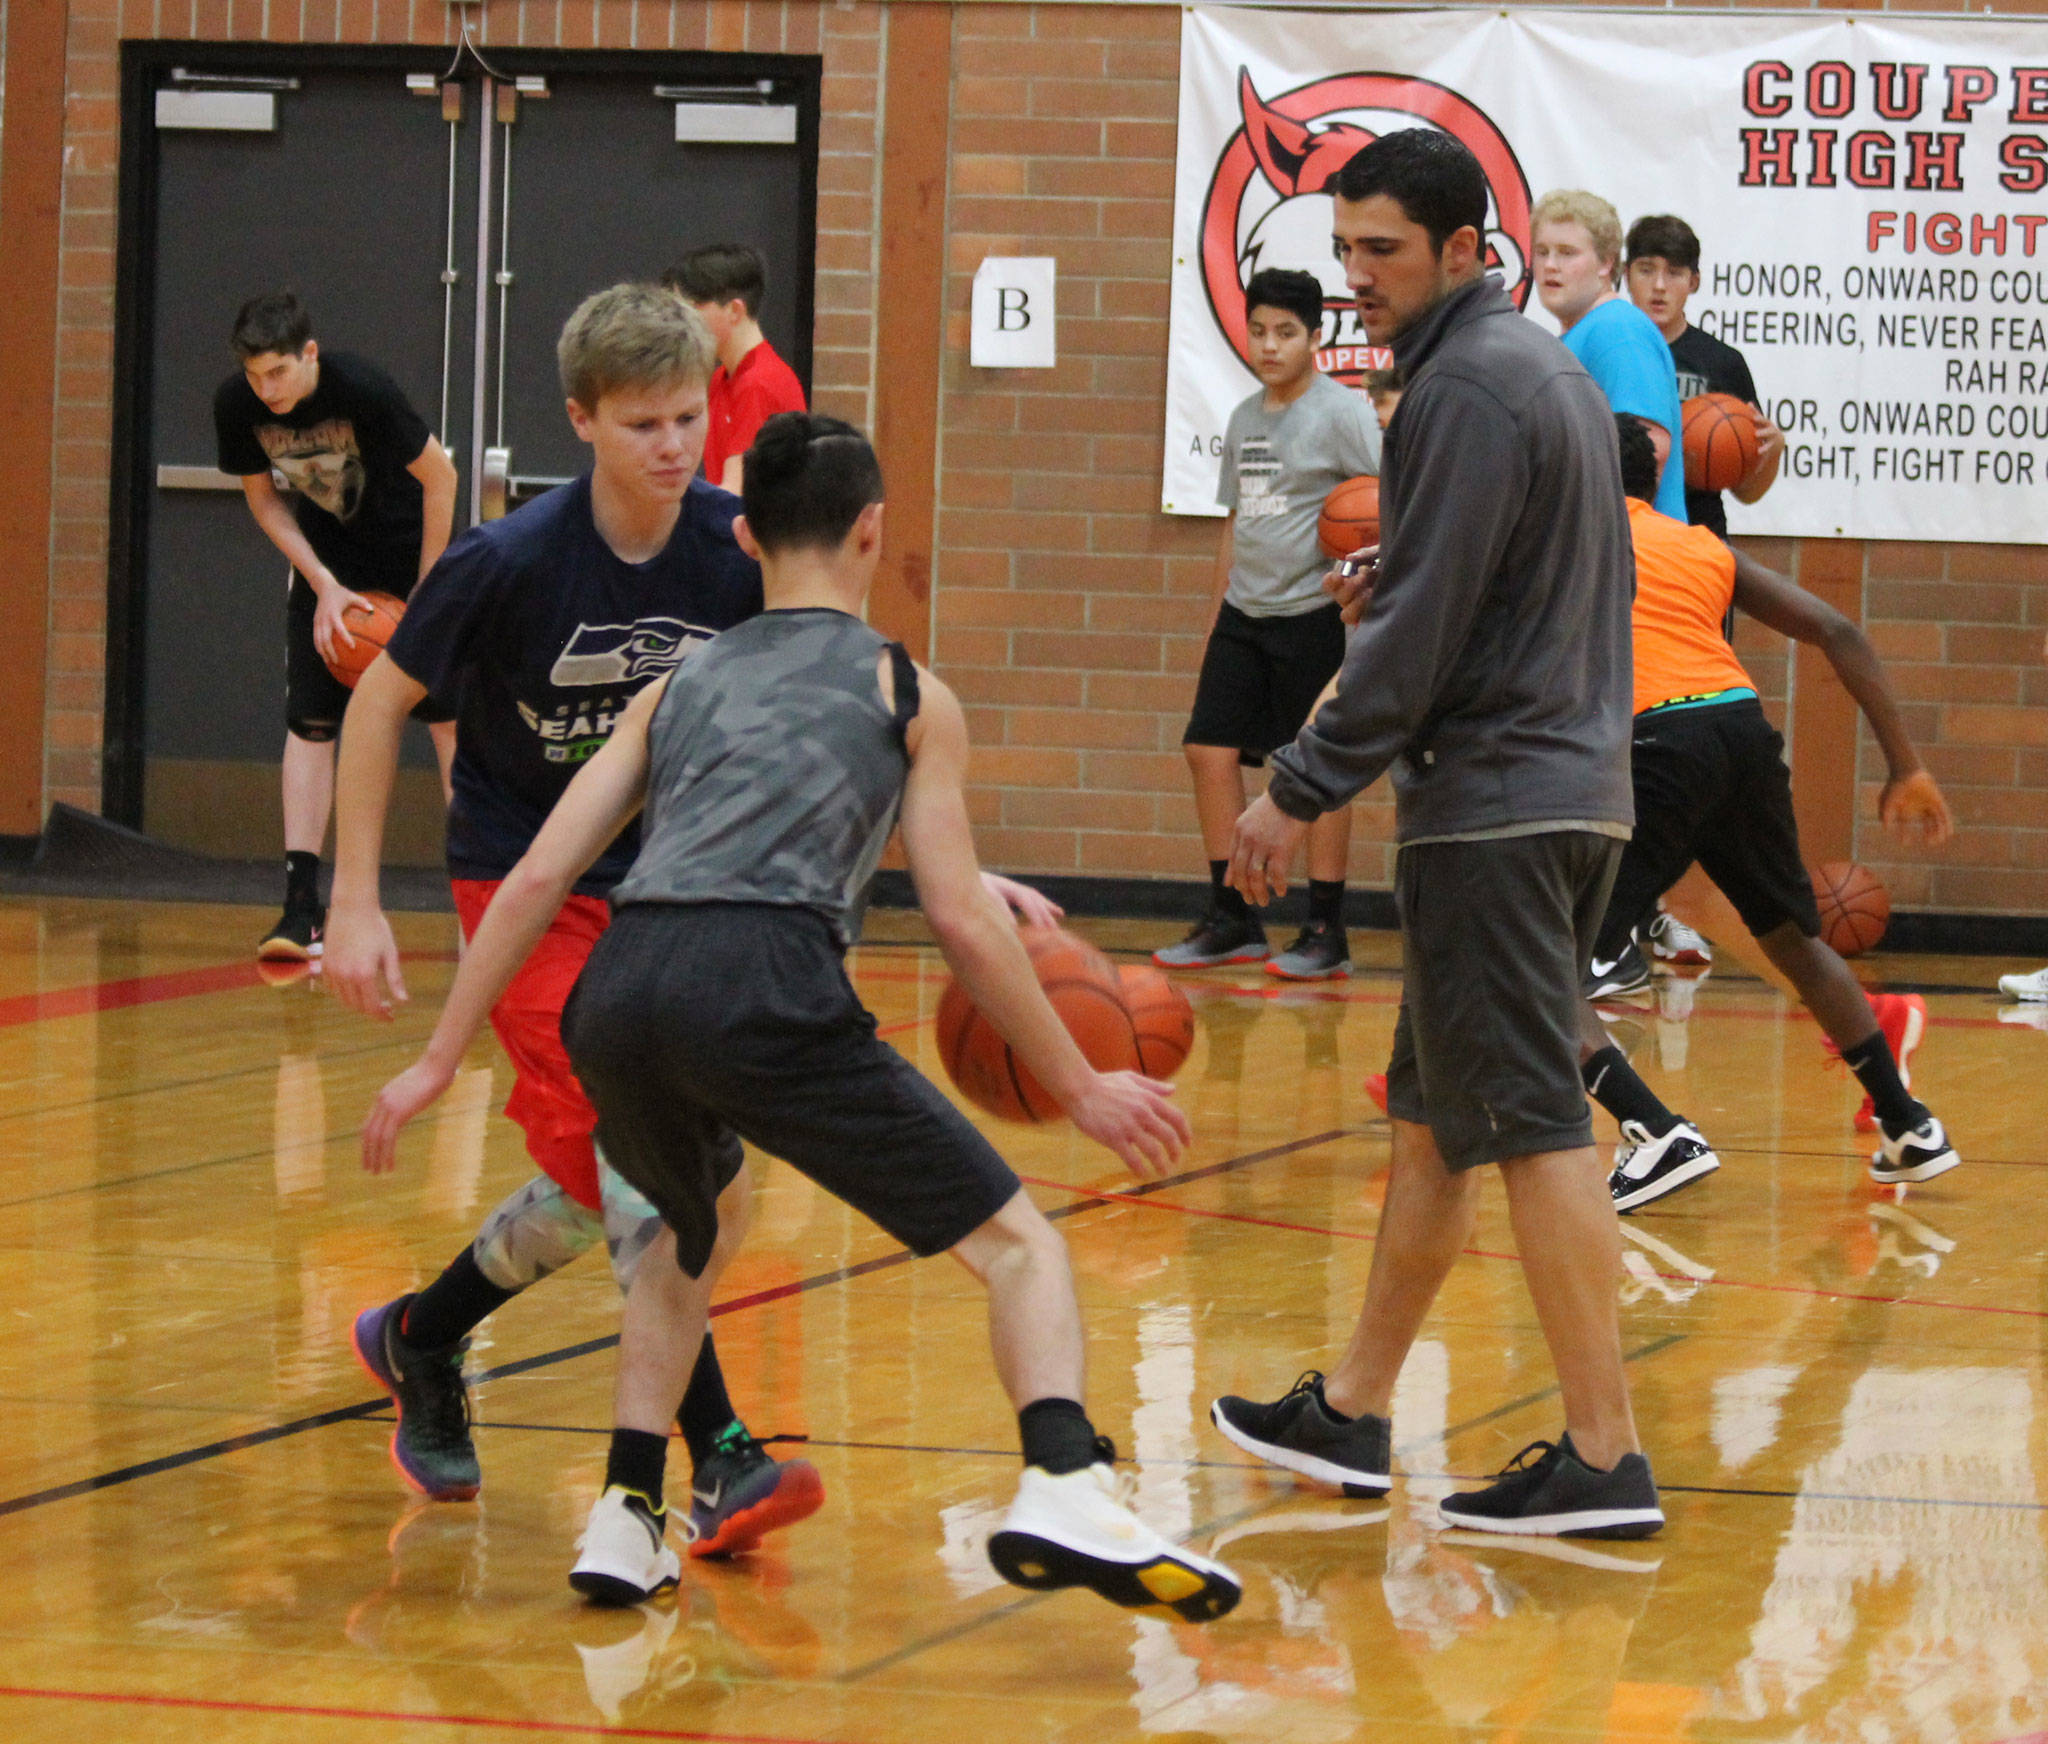 New Coupeville High School boys basketball coach Brad Sherman watches Mason Grove, left, and Jered Brown work during a drill Thursday. (Photo by Jim Waller/Whidbey News-Times)